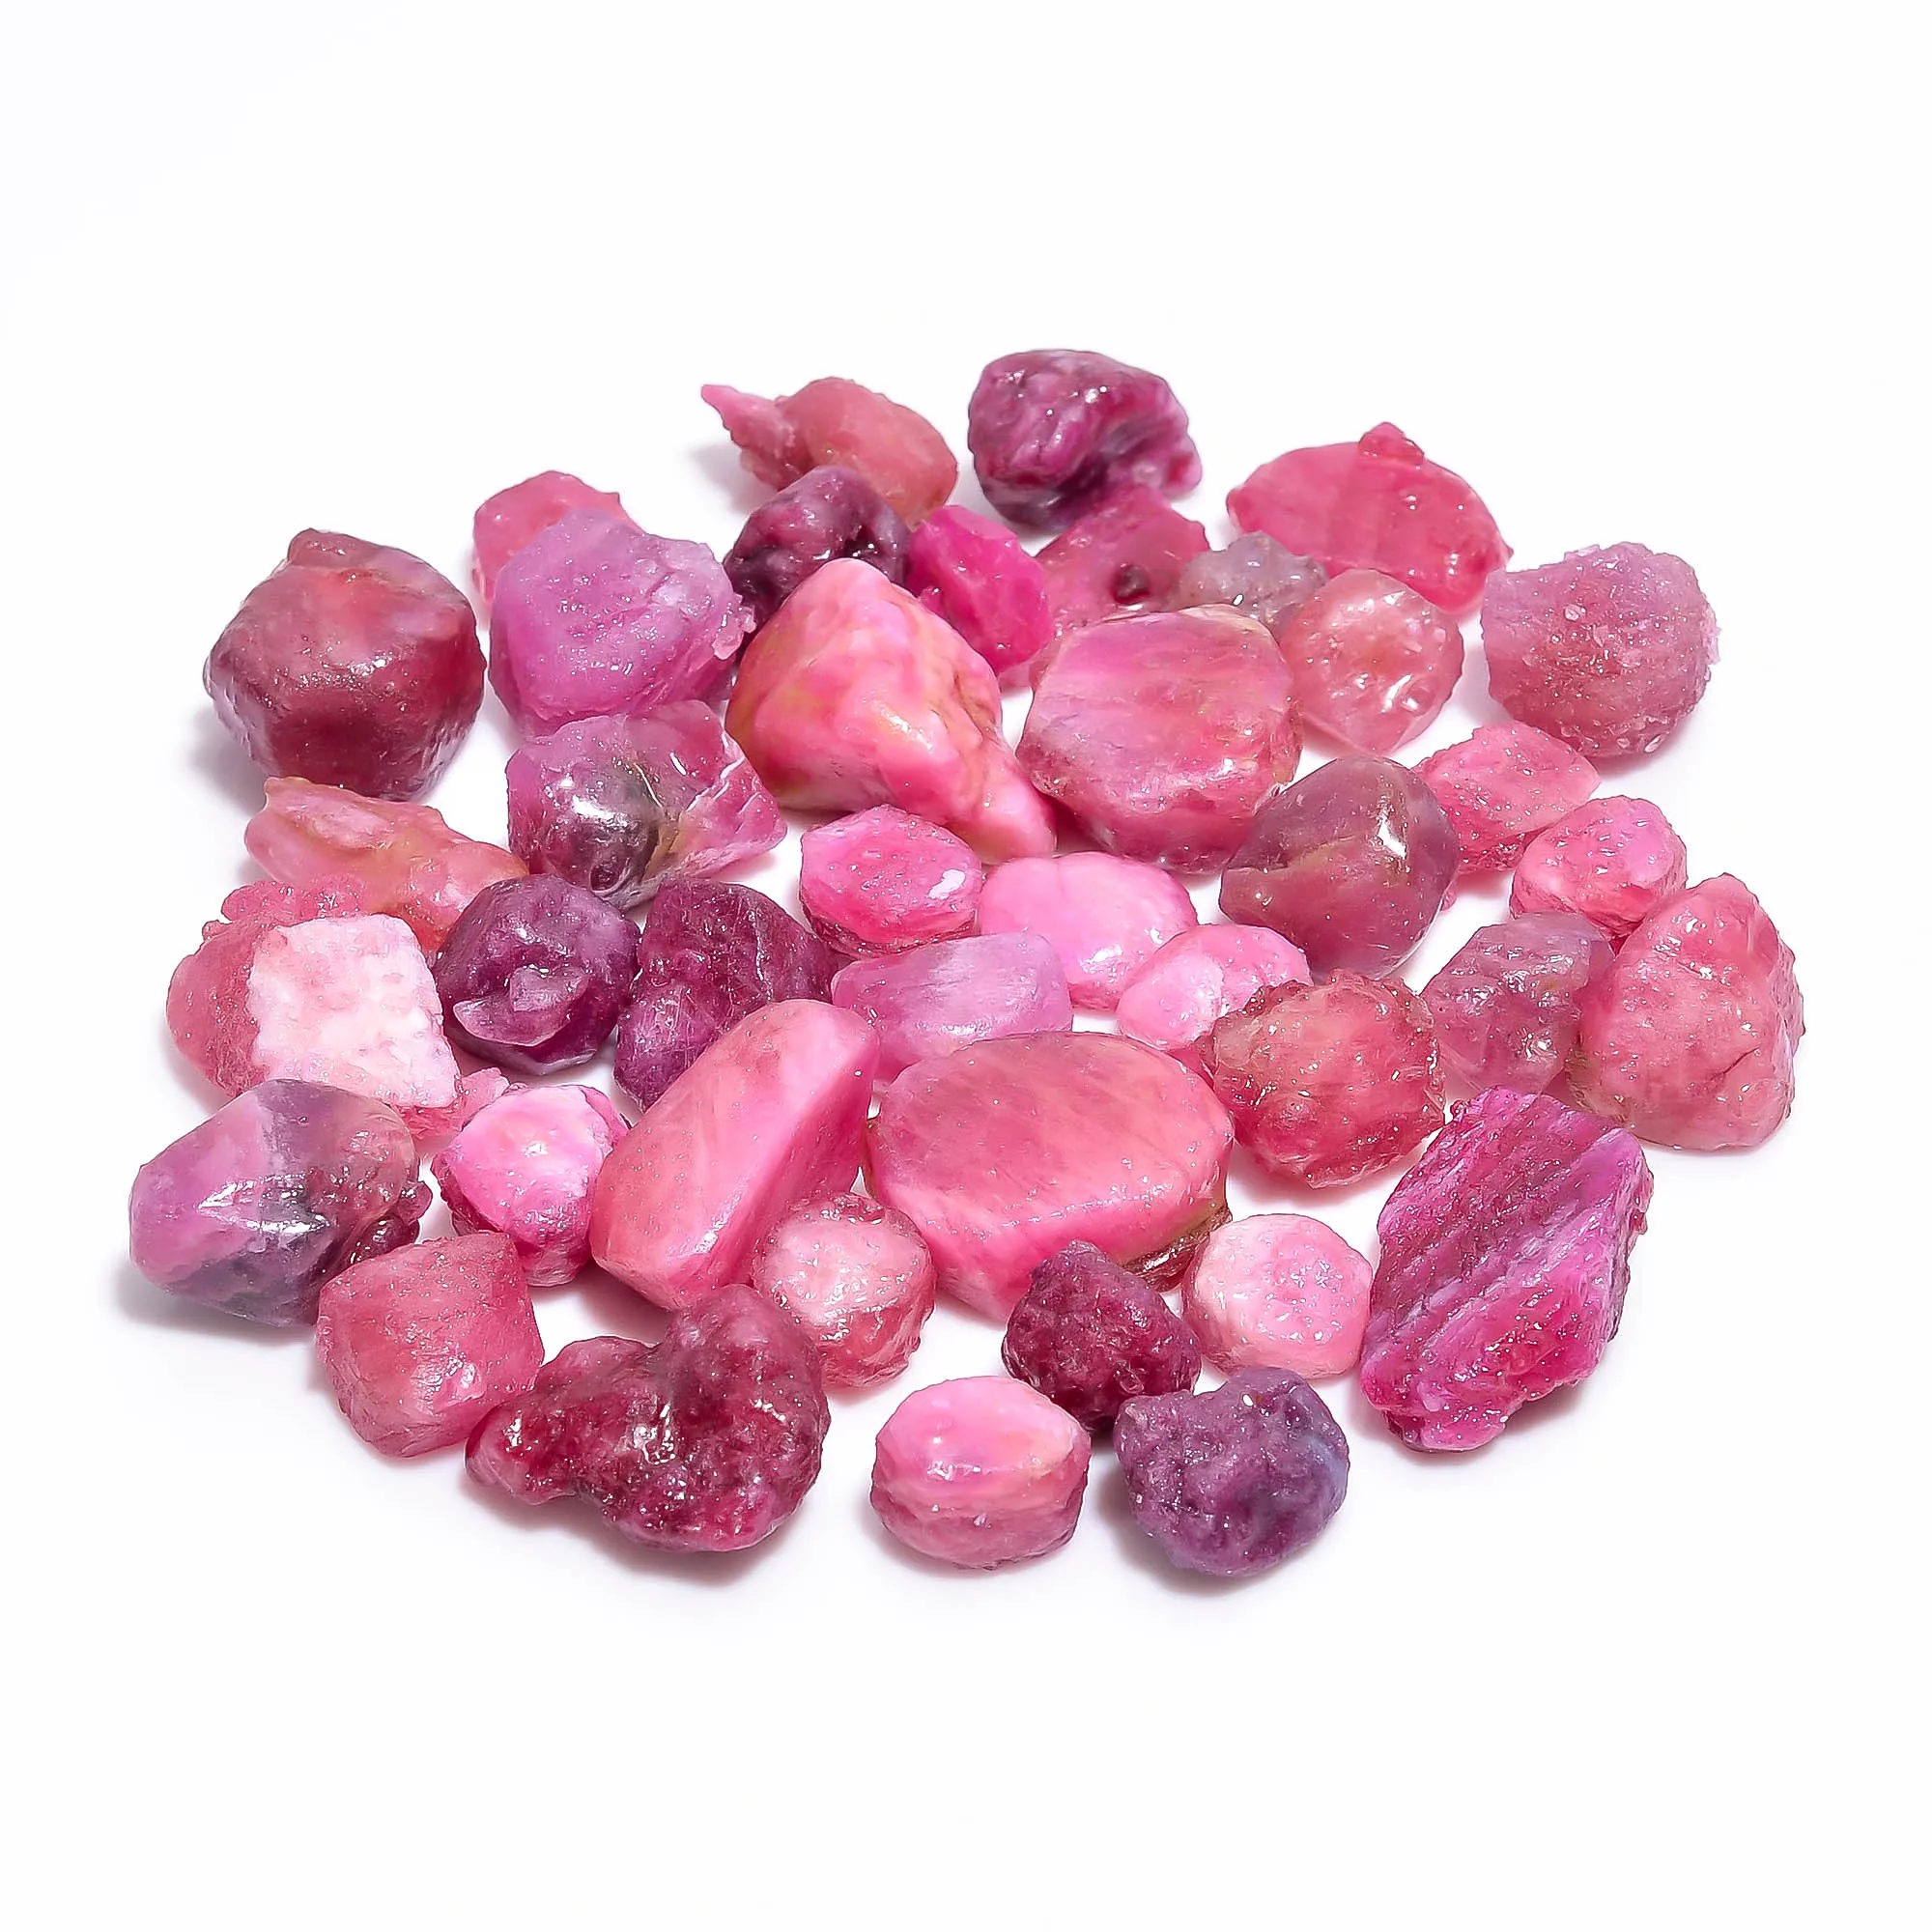 July Birthstone 50carats pack Raw for Jewelry Making Loose Wholesale Stones Love Stone Healing Crystals Natural Gemstones and Crystals Lot OdrillionGems Natural Raw Ruby Gemstone 